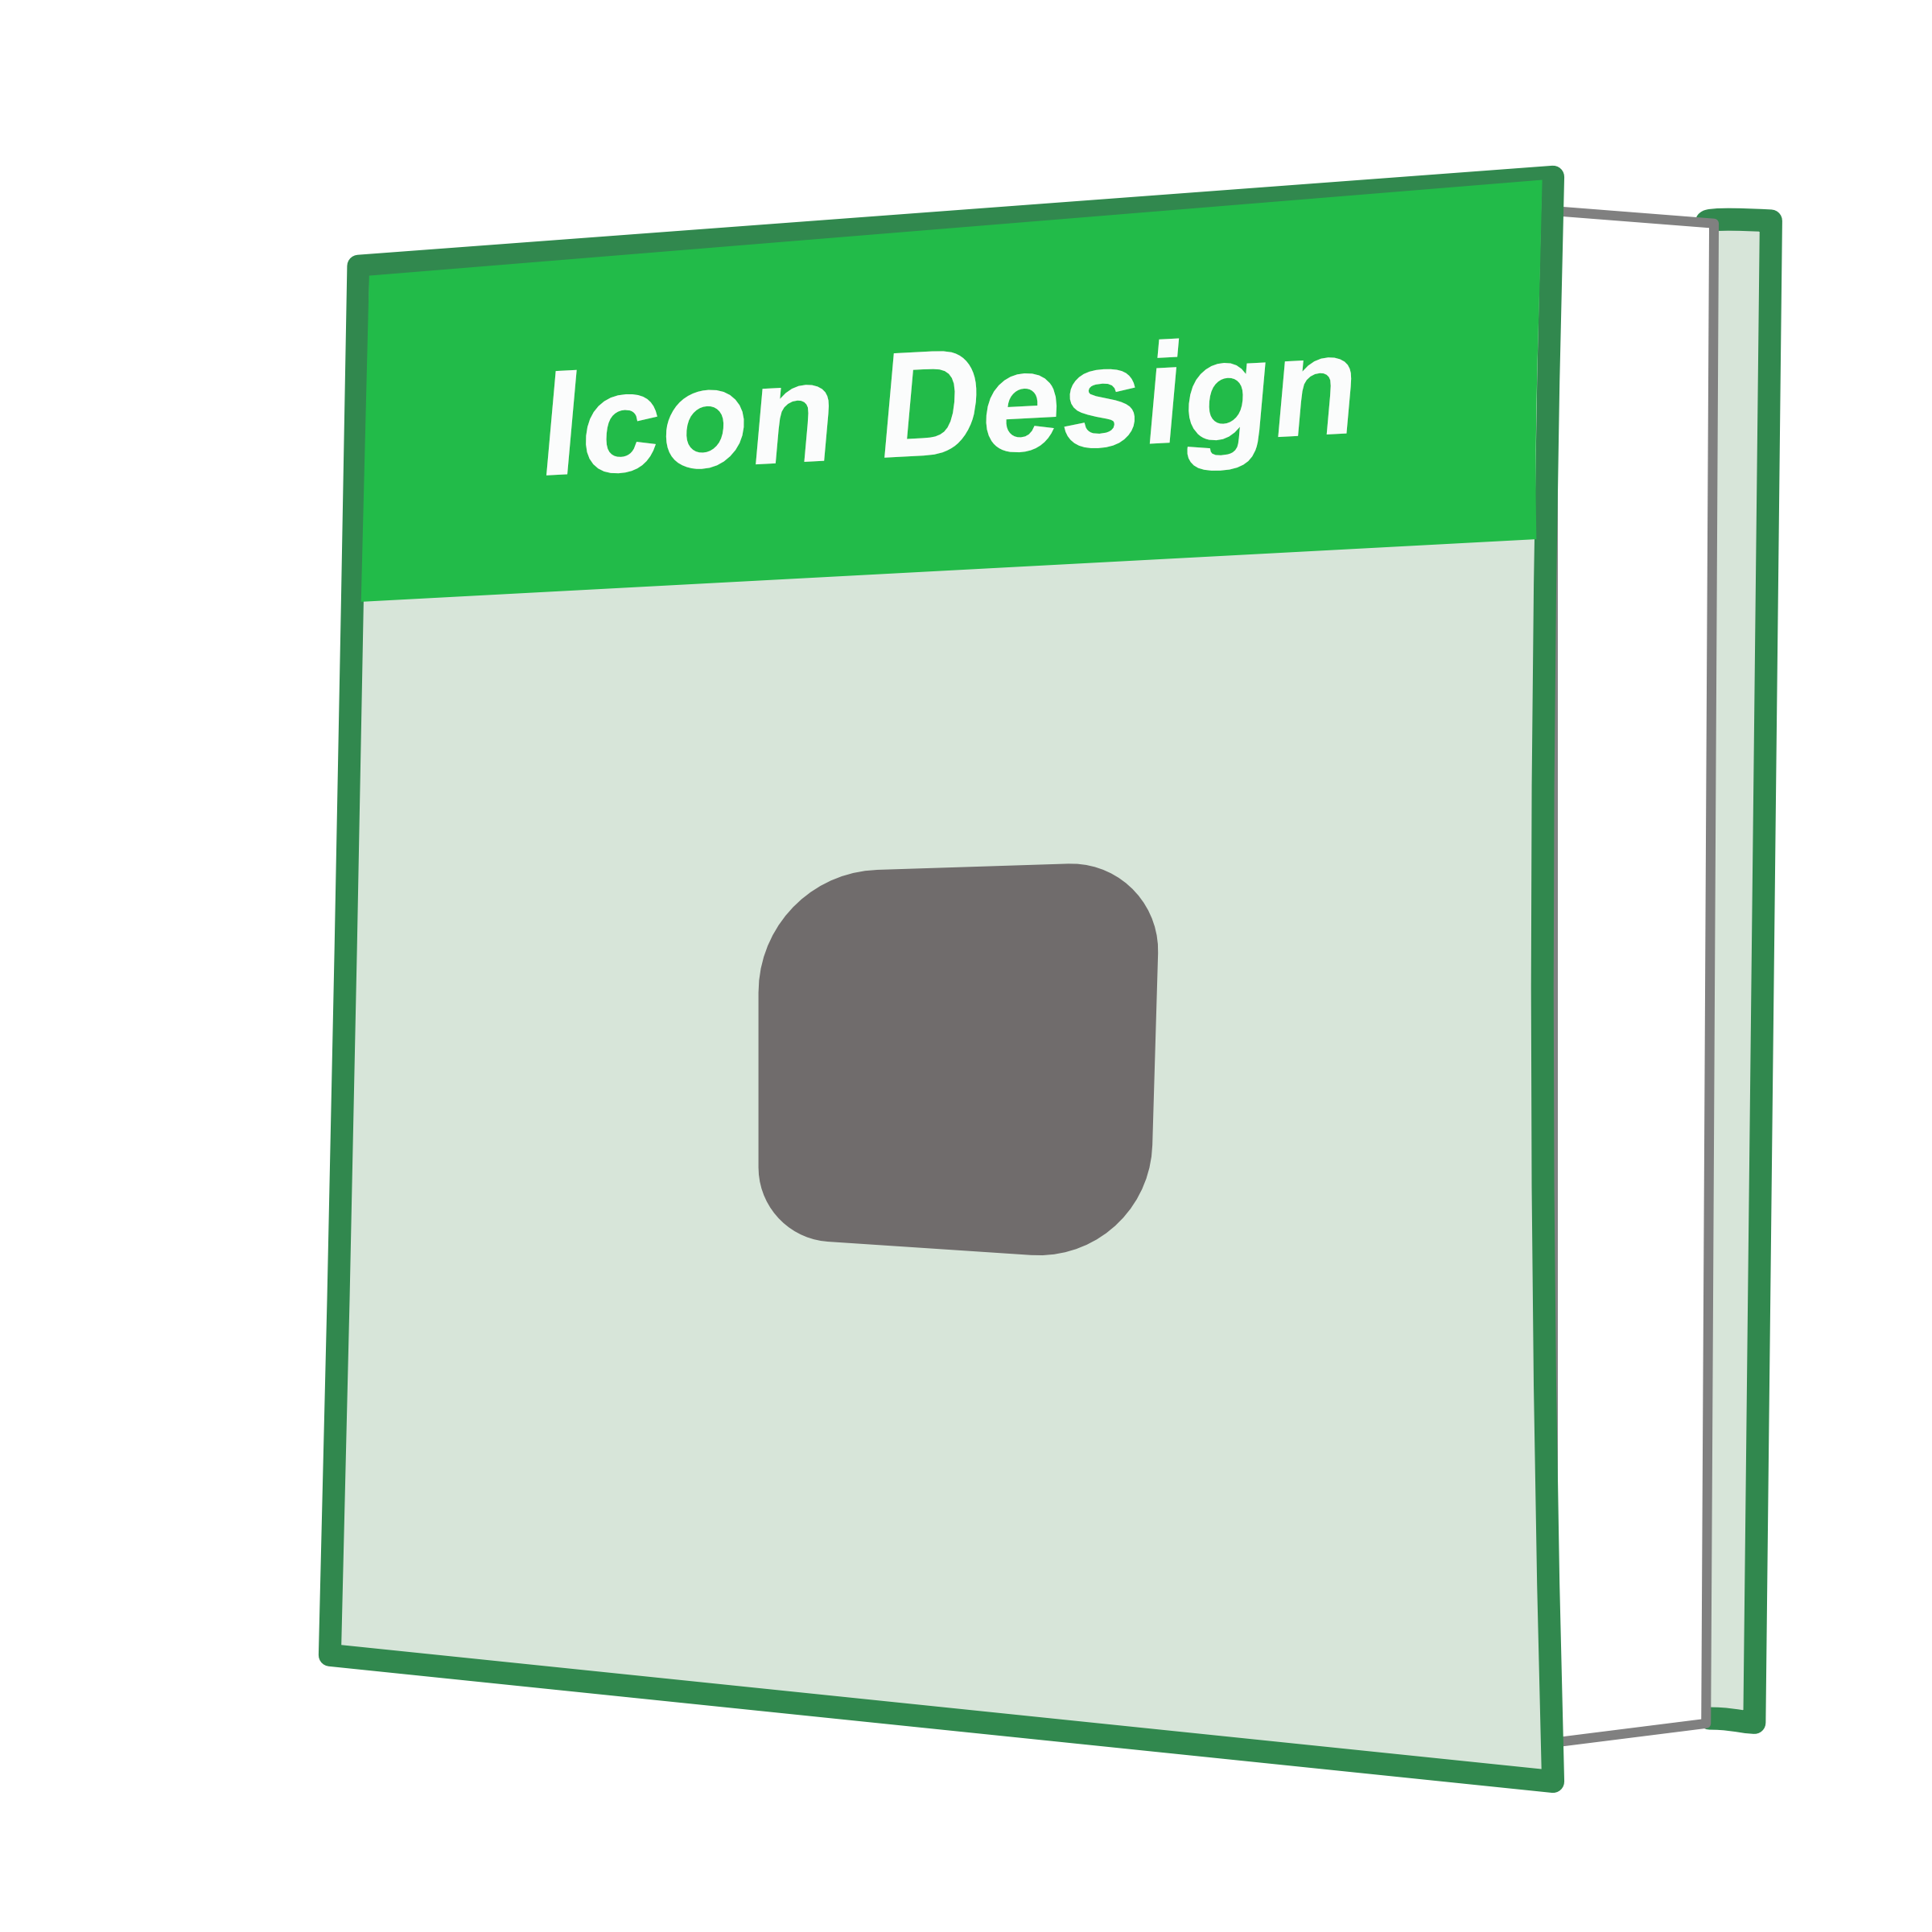 The Icon Design Book cover — approximately.